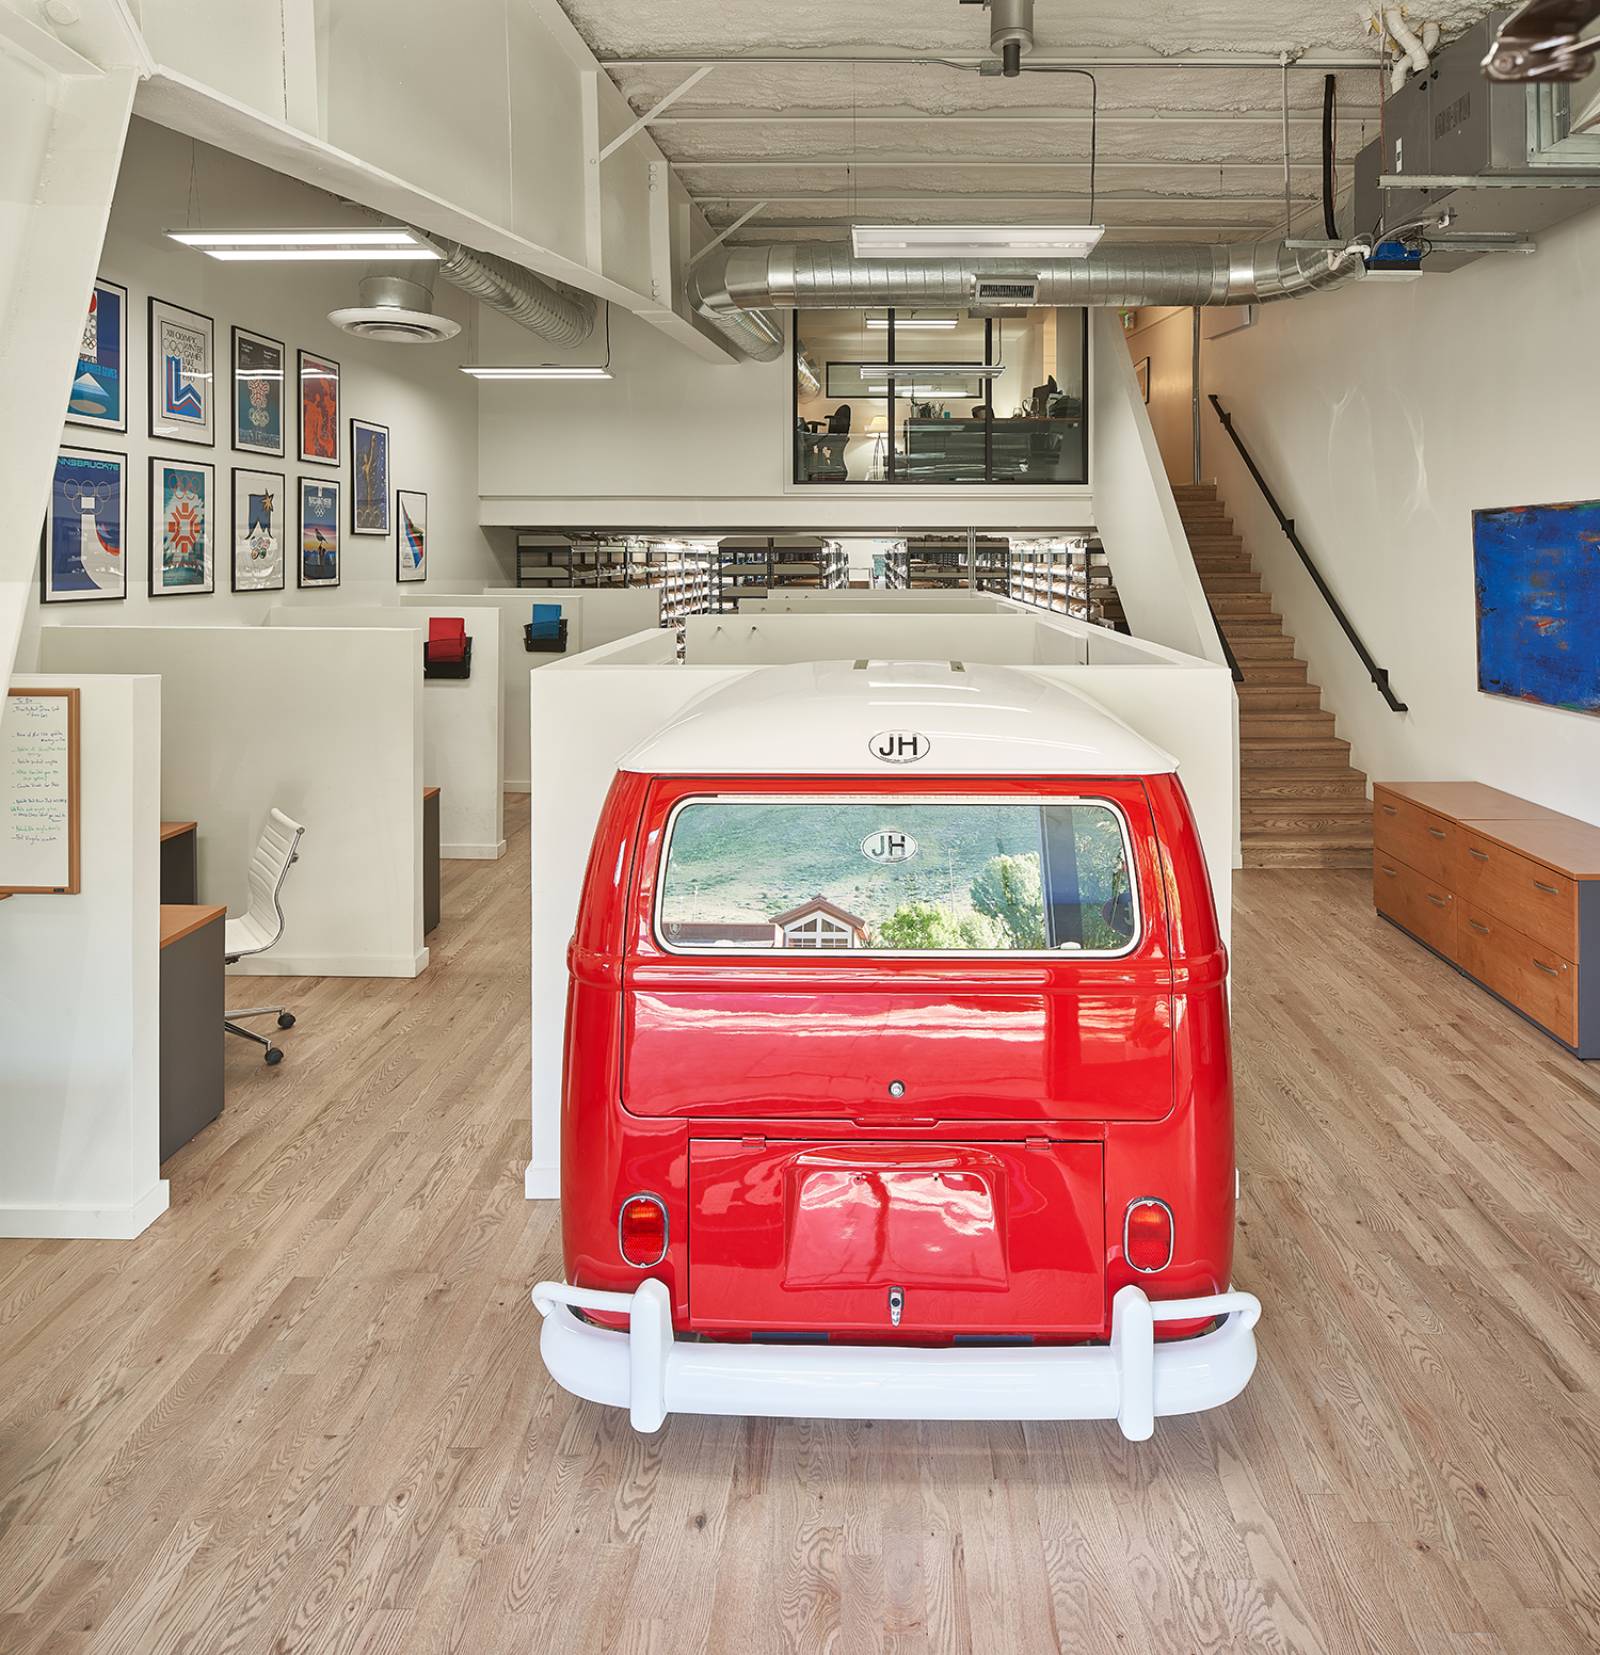 Interior detailed view of the showcase Volkswagen at TGT Stickets, a custom retail space designed by Farmer Payne Architects.